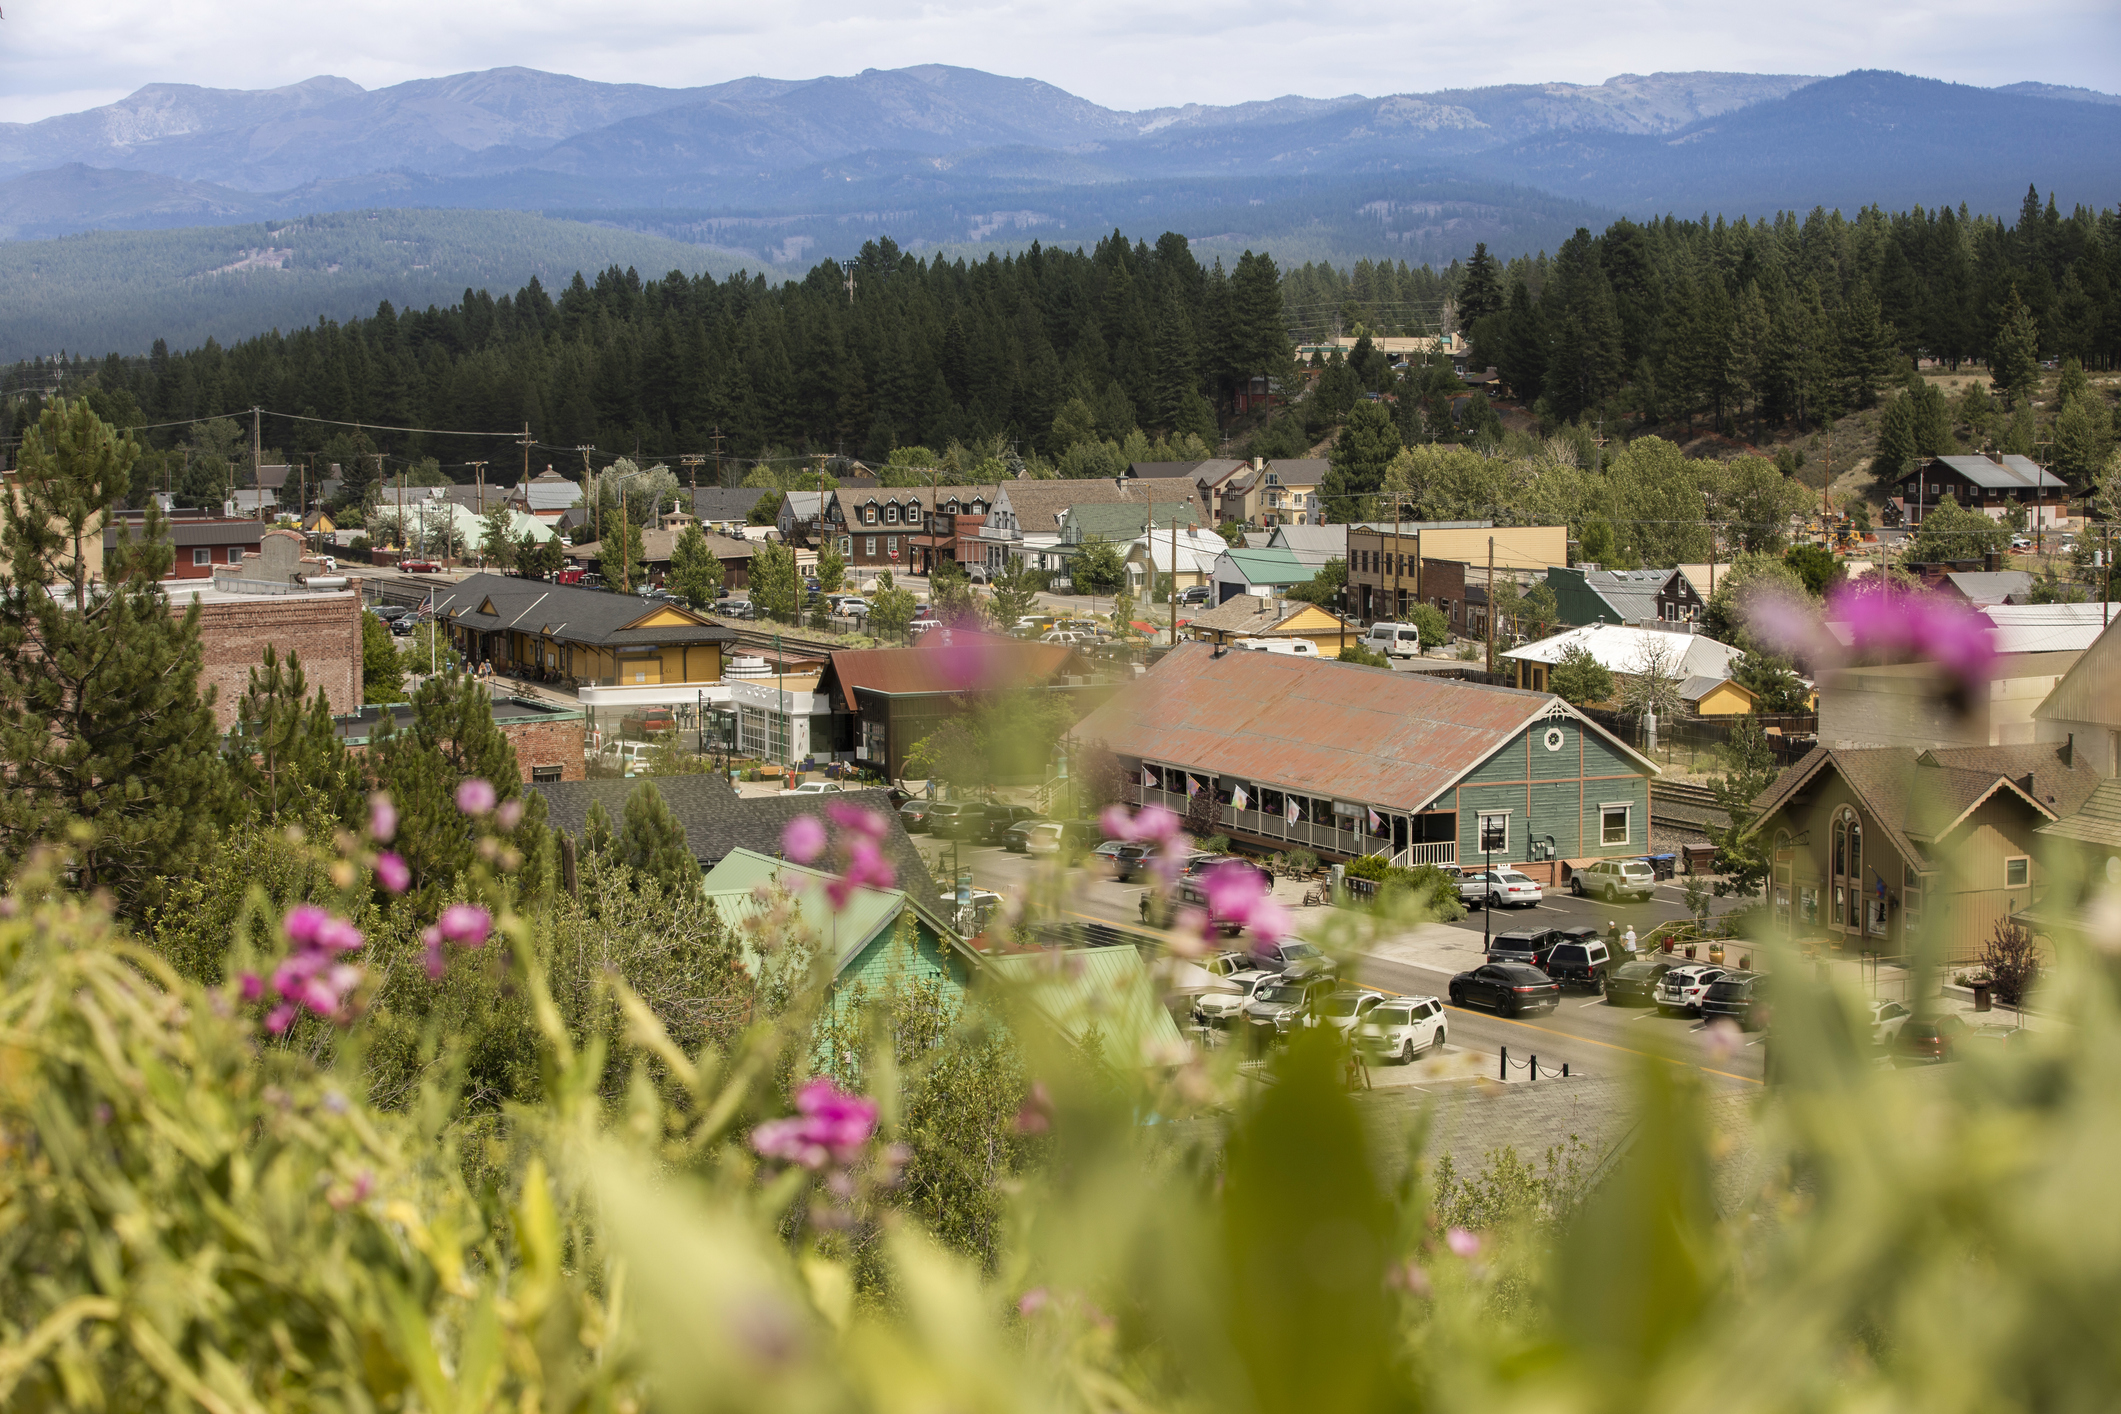 Things to do in Truckee California